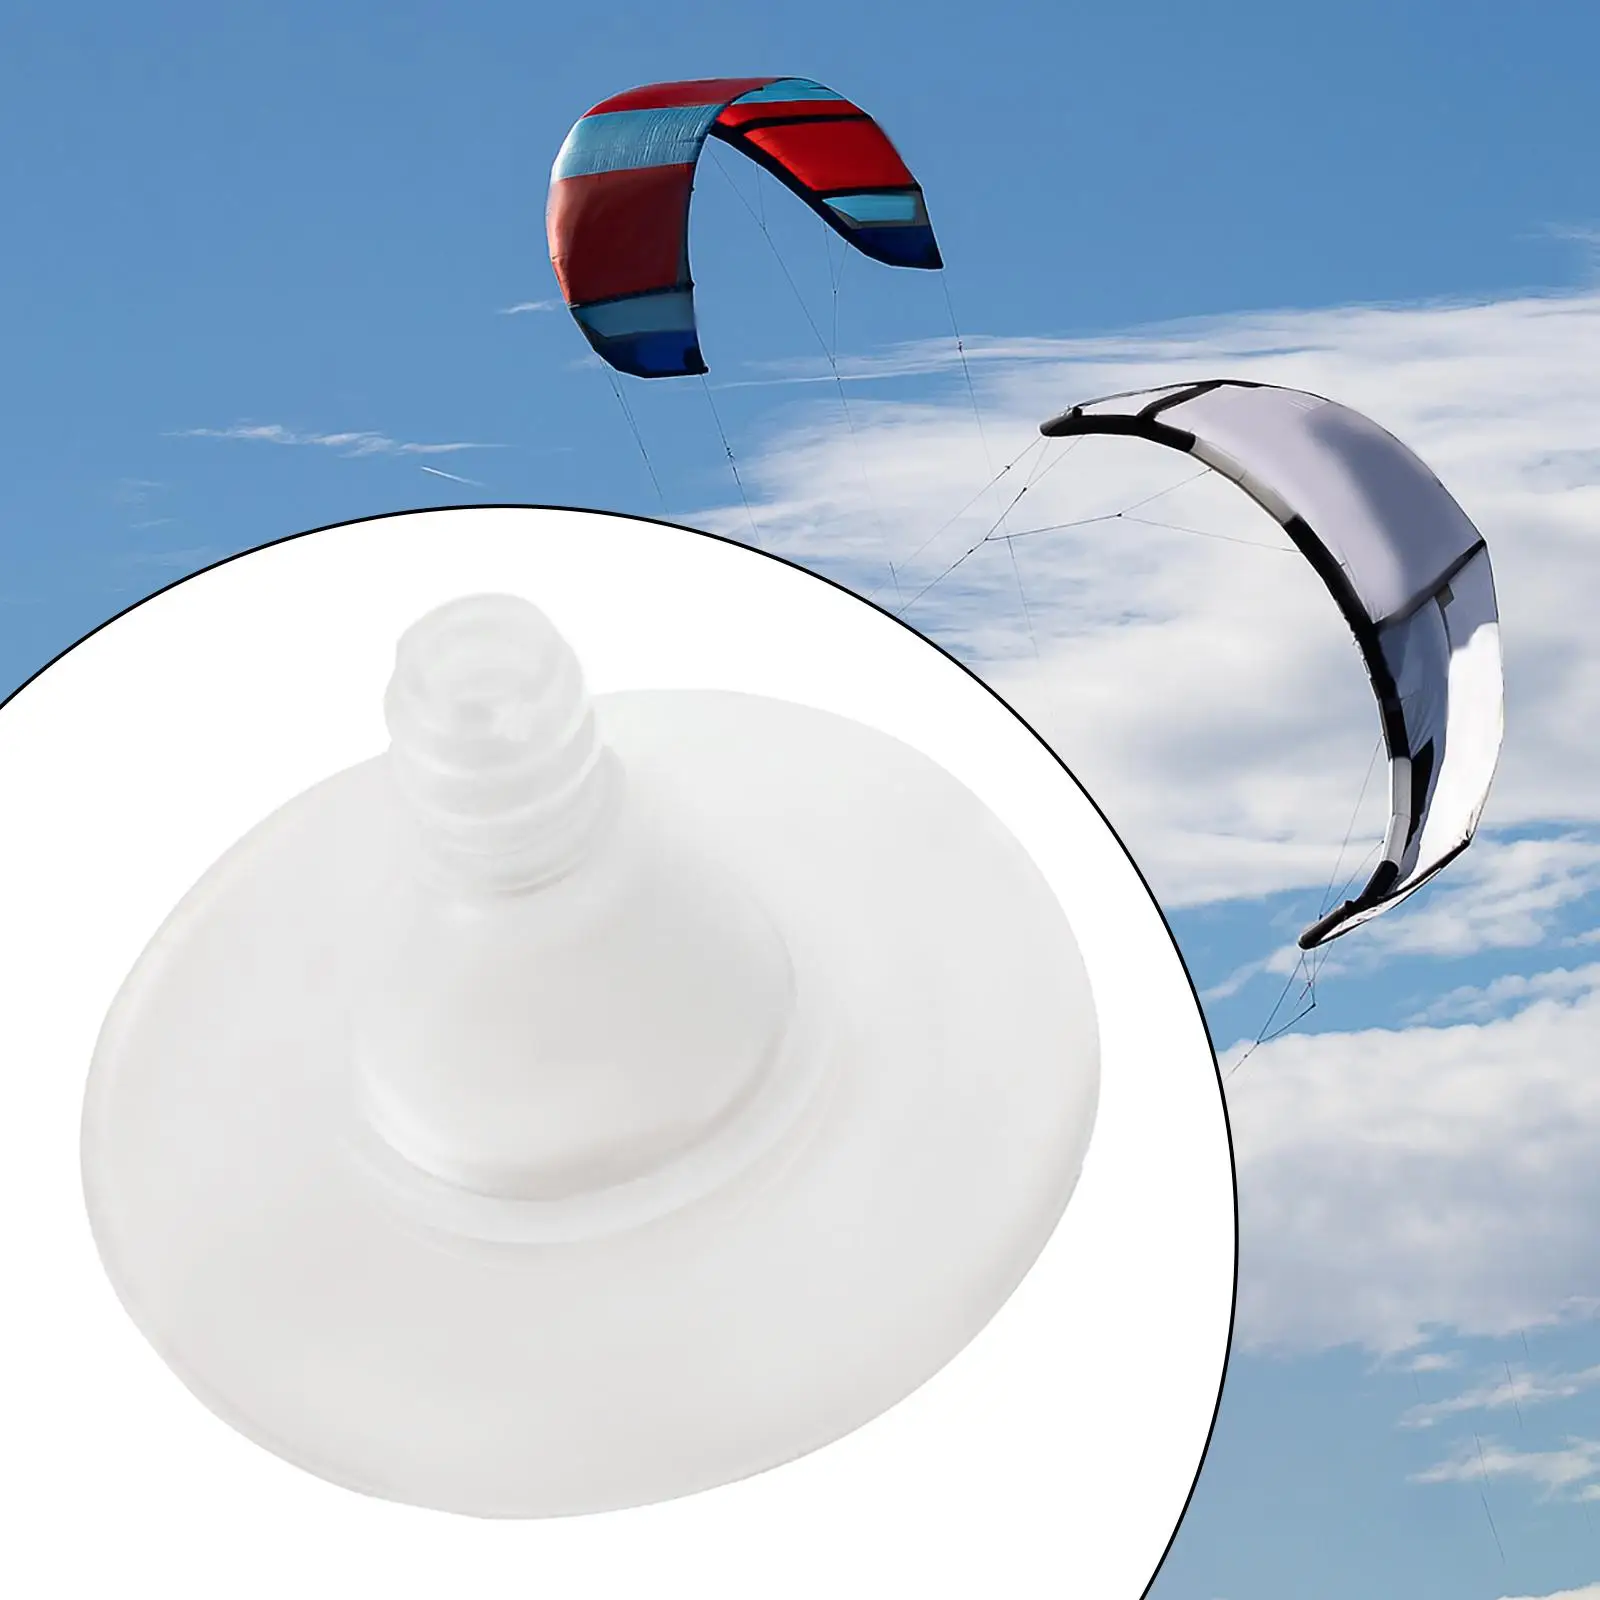 TPU Inflatable Kitesurfing Kite Inflate One Pump Valve Air Inlet without Self Stick for Repair Accessories